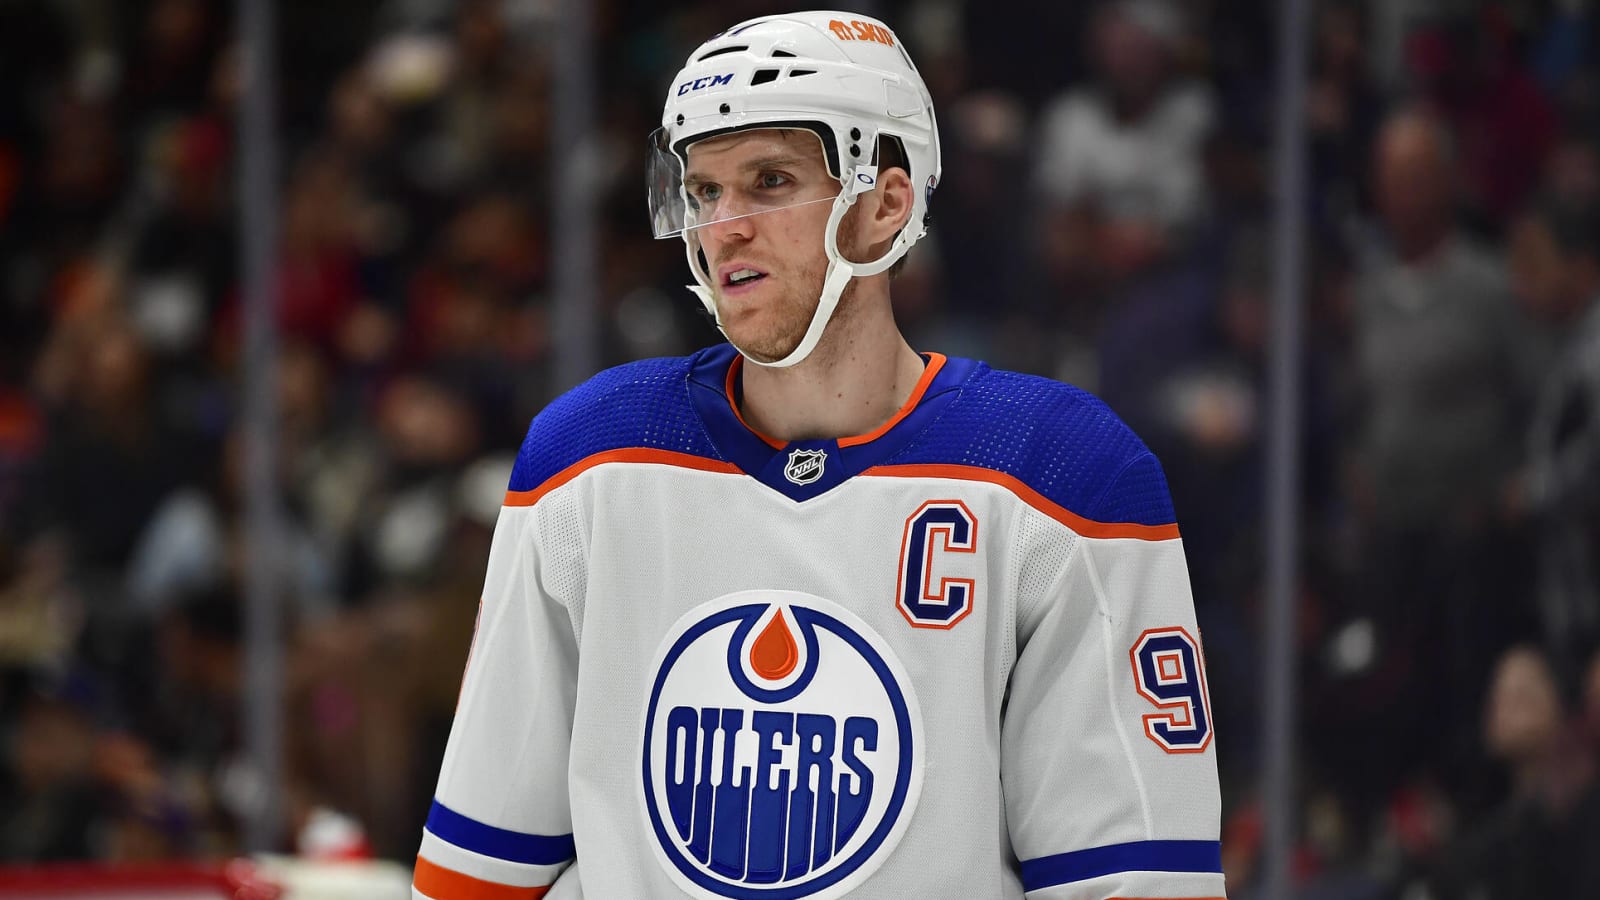 Oilers vs. Kings: Stanley Cup playoff series preview and prediction